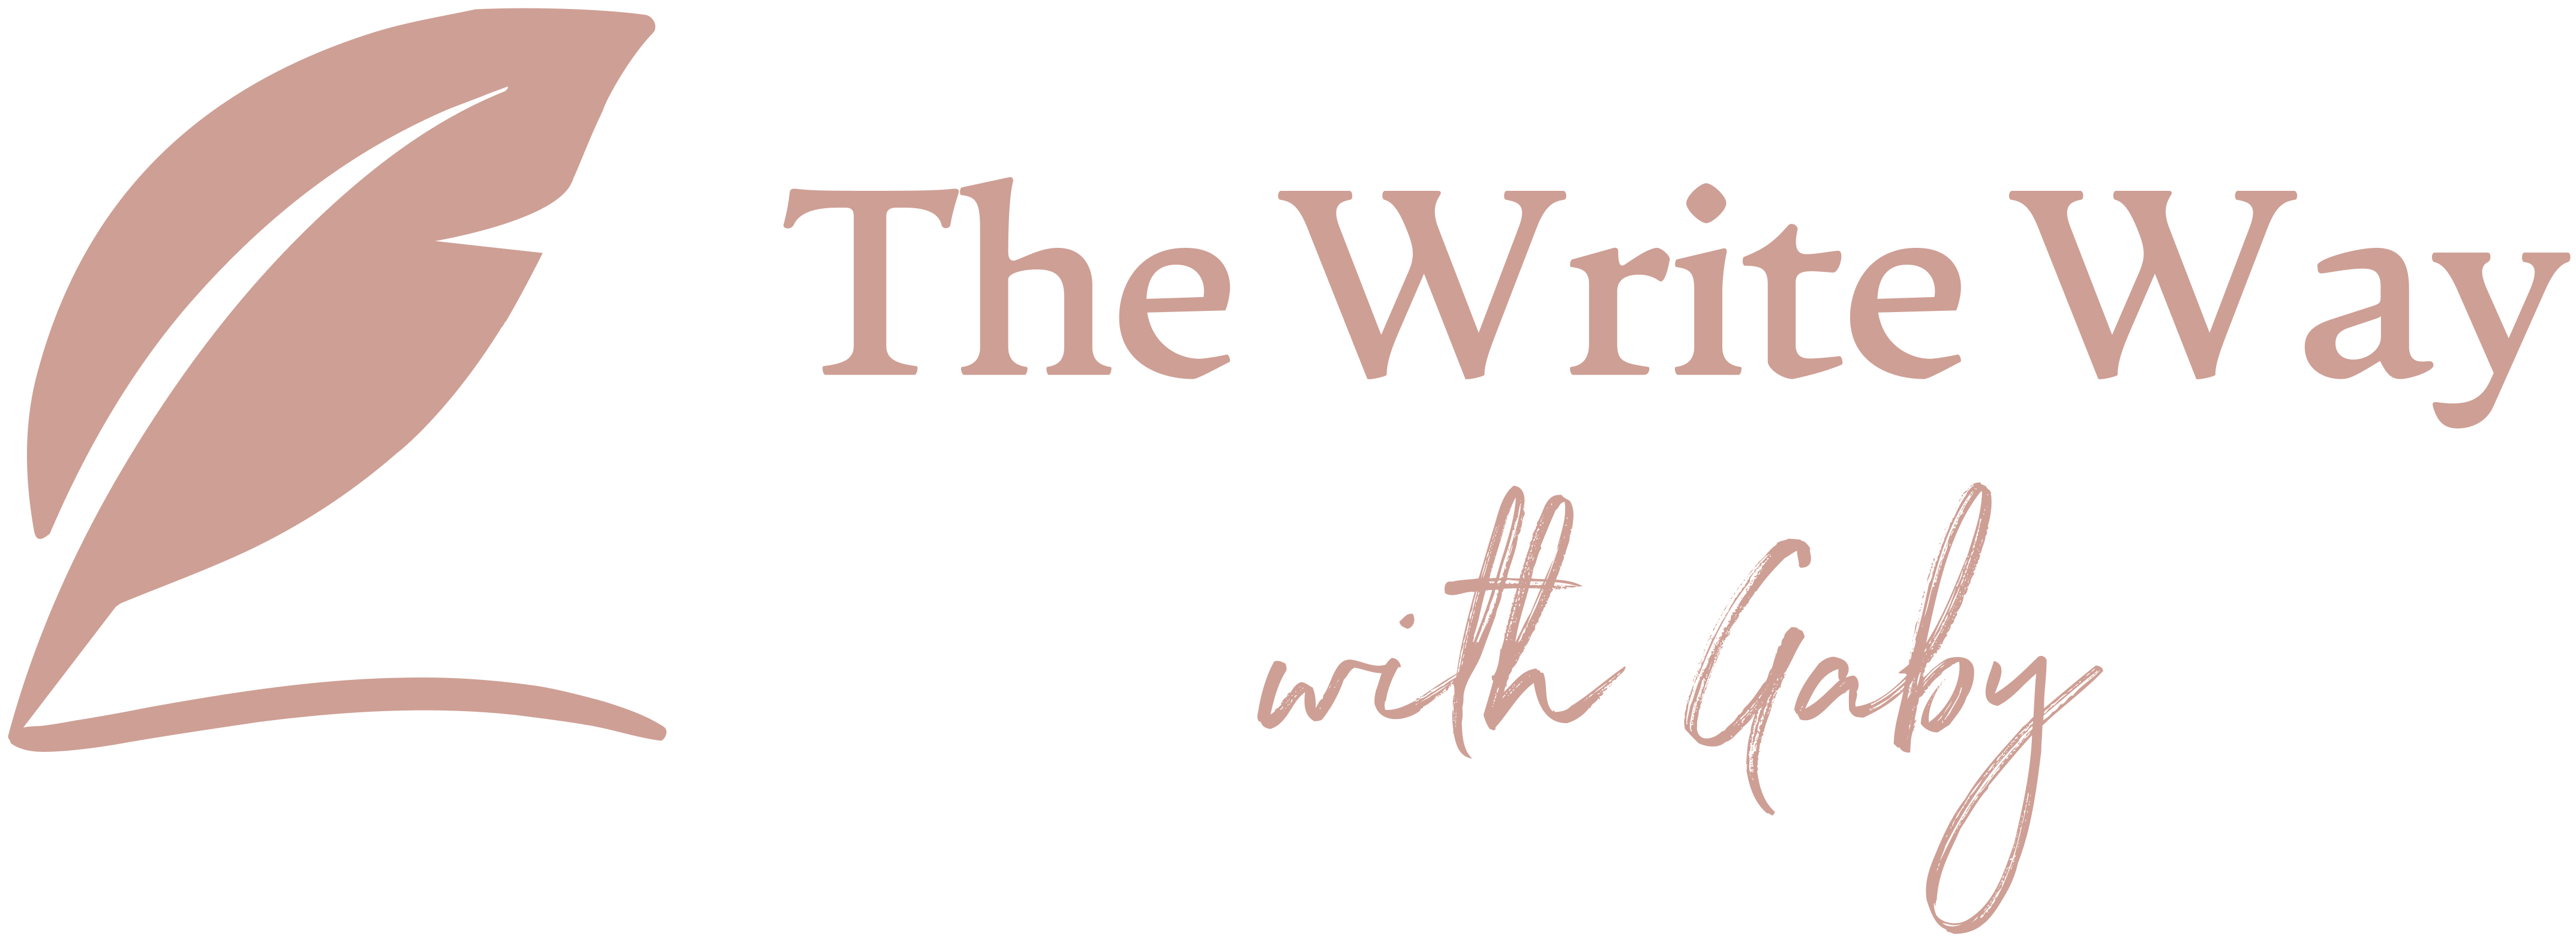 The Write Way with Gaby